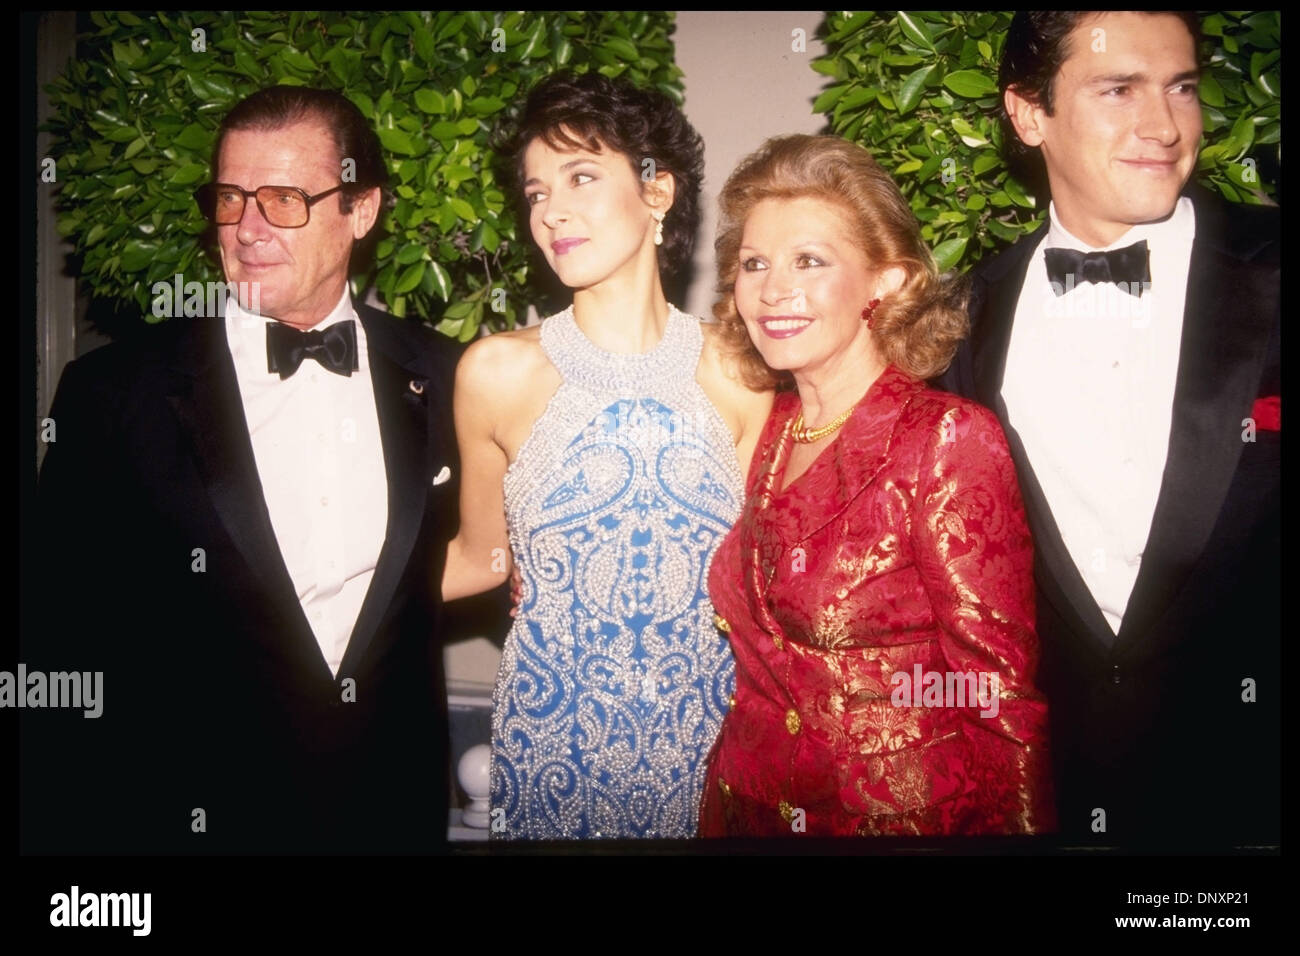 1992;  Hollywood, CA, USA;   ROGER MOORE with his wife LUISA and children GEOFFREY and DEBRA MOORE.  Mandatory Credit: Kathy Hutchins/ZUMA Press. (©) Kathy Hutchins Stock Photo